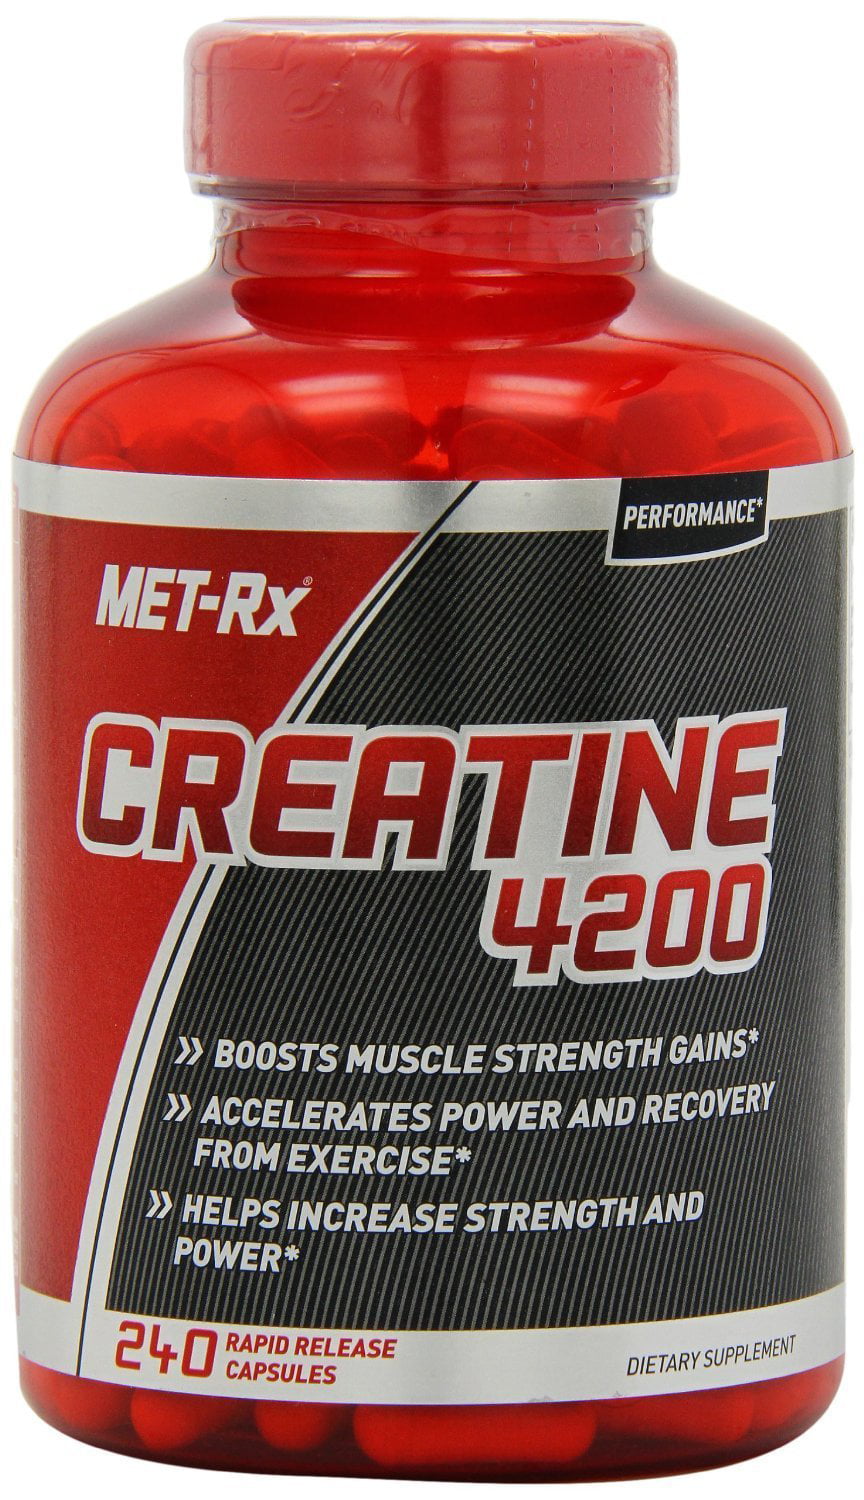 MET-Rx Creatine 4200 Supplement, Supports Muscles Pre and Post Workout, 240 Capsules 240 Count (Pack of 1) NEW